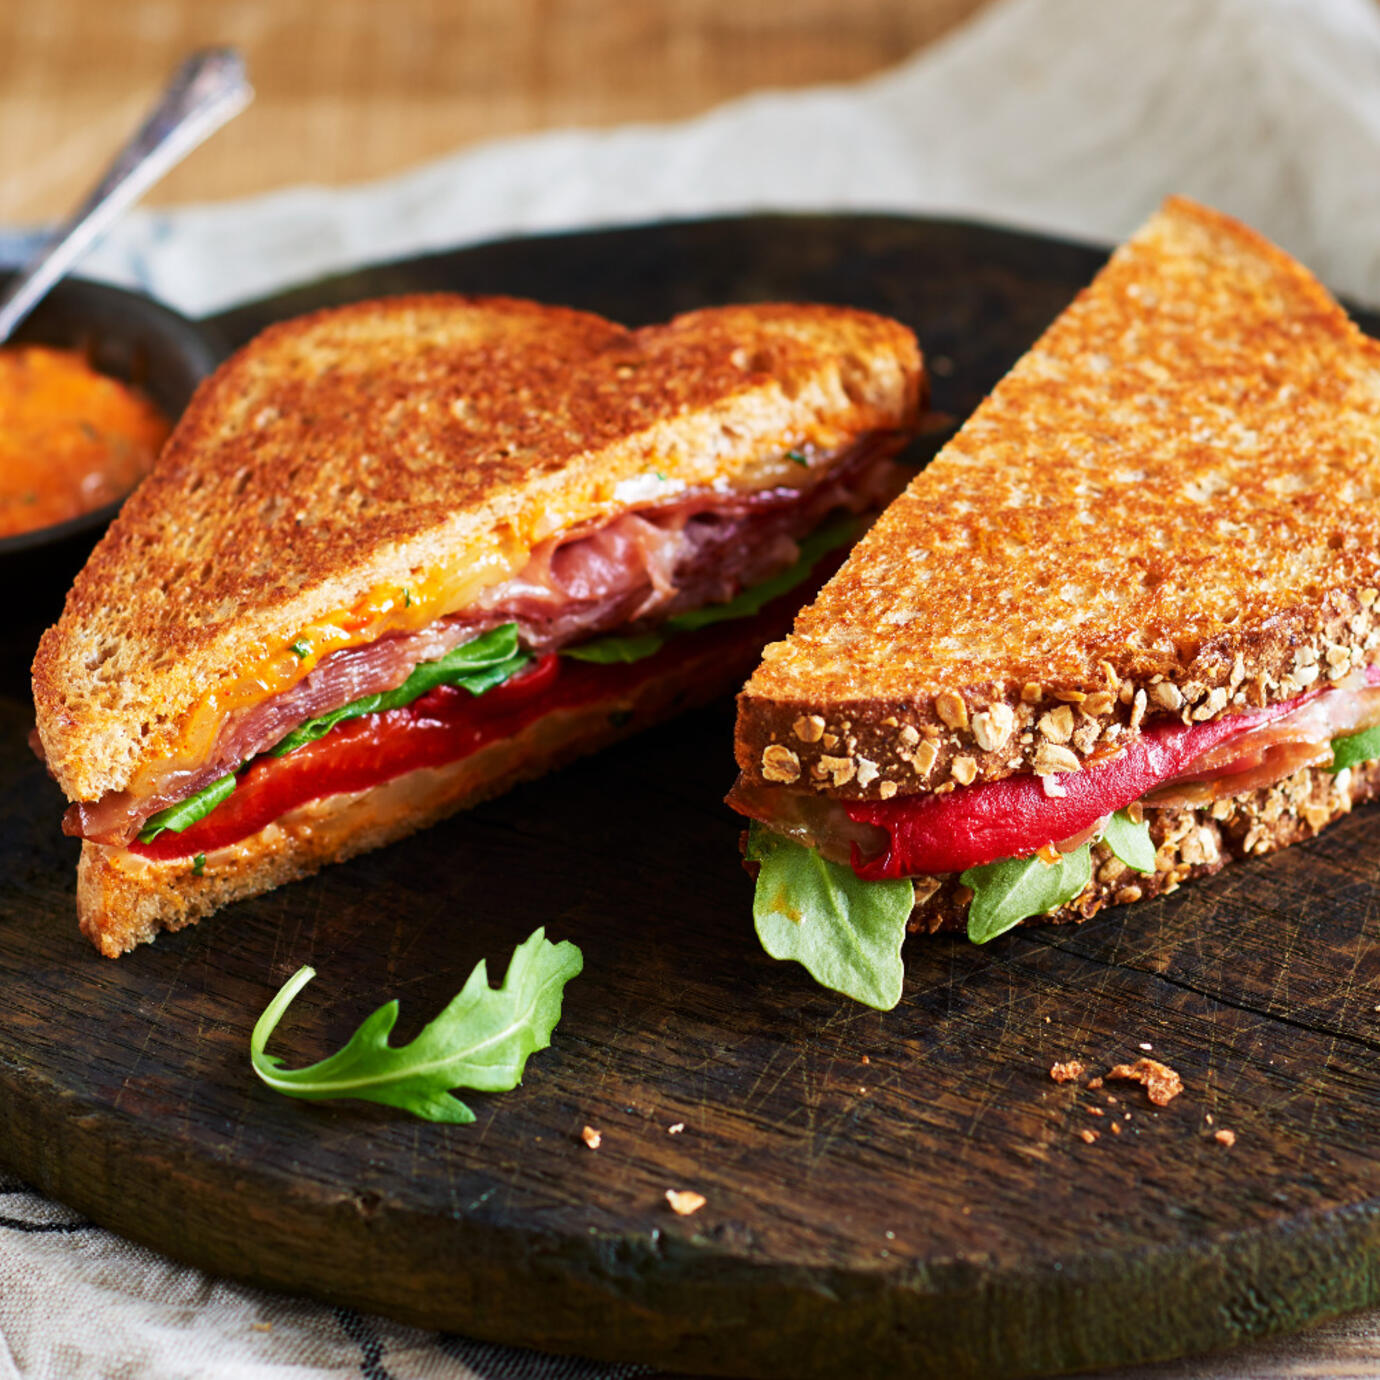 Prosciutto and Roasted Red Pepper Sandwich